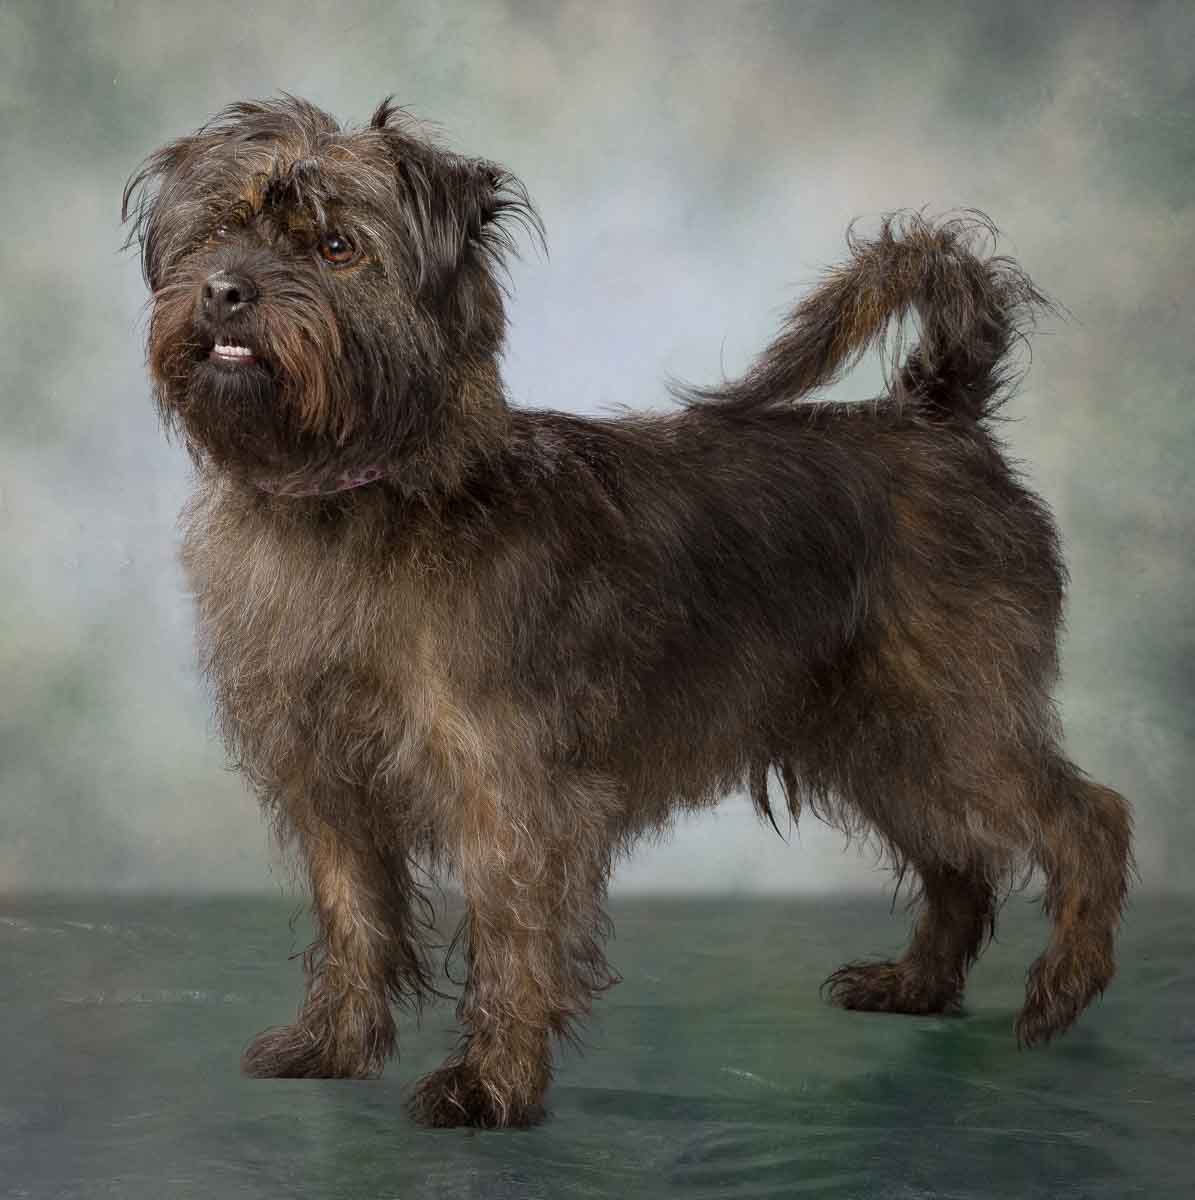 A shaggy dog standing on top of a green floor.